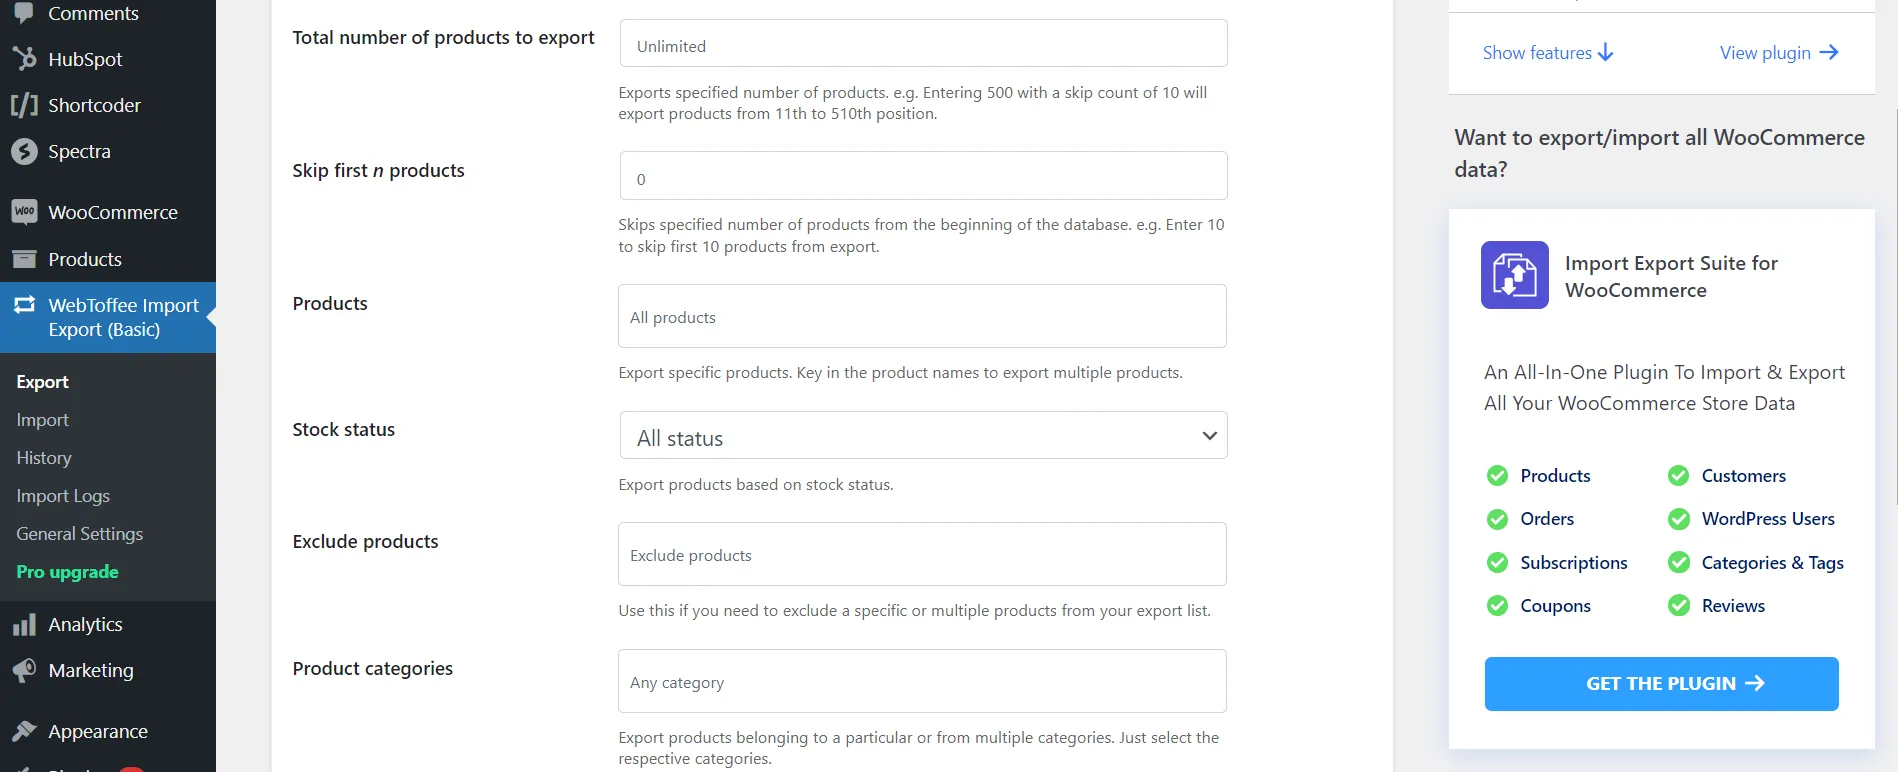 Product data filter for export